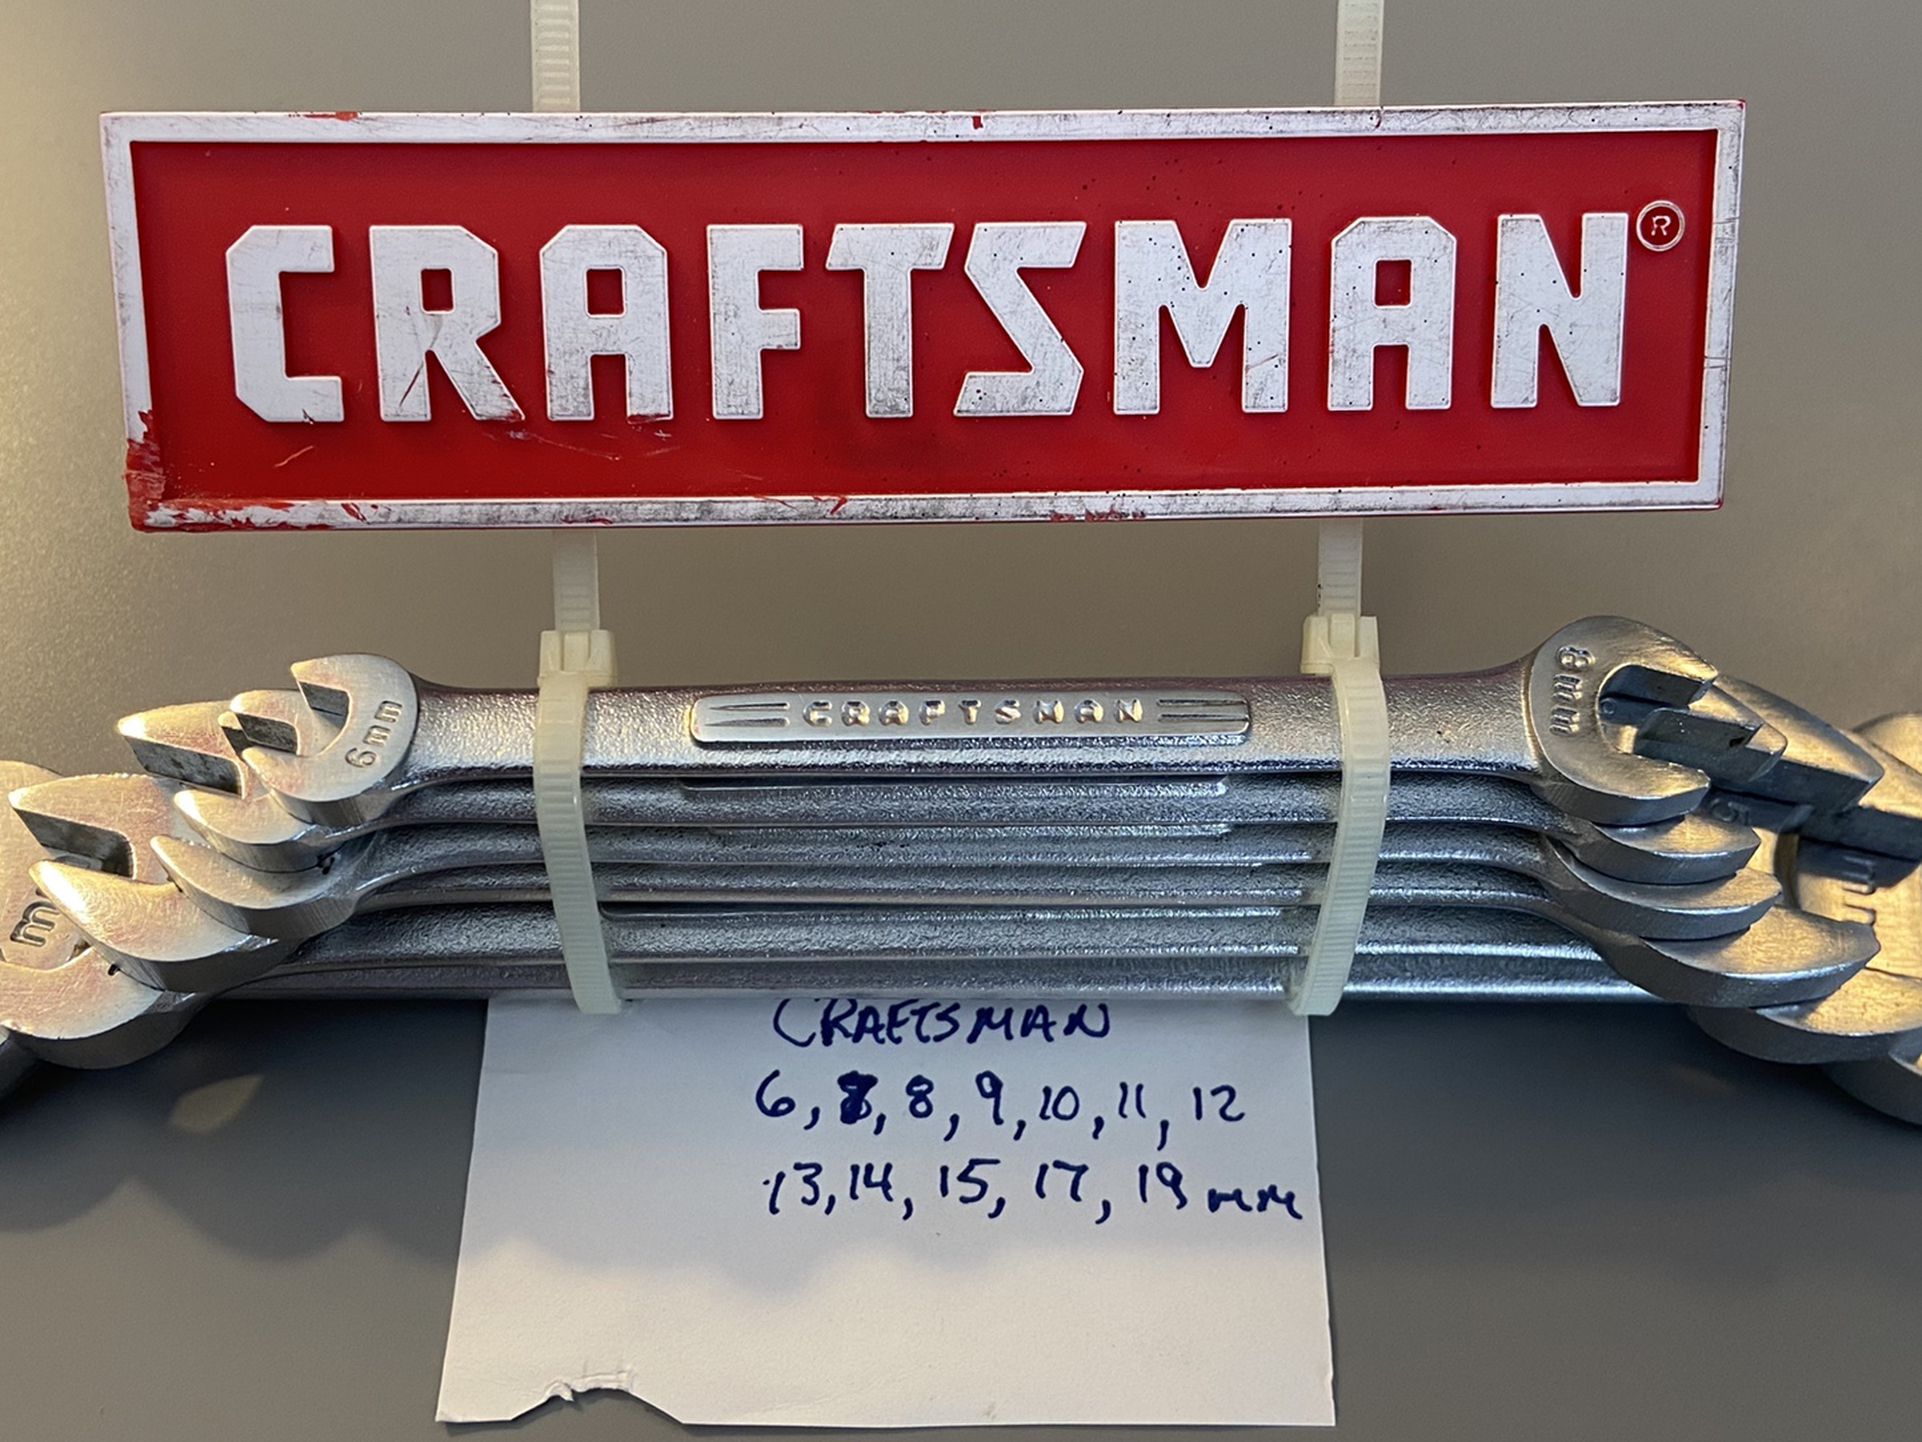 Craftsman Metric Open-end Wrenches (Forged in U.S.A.)